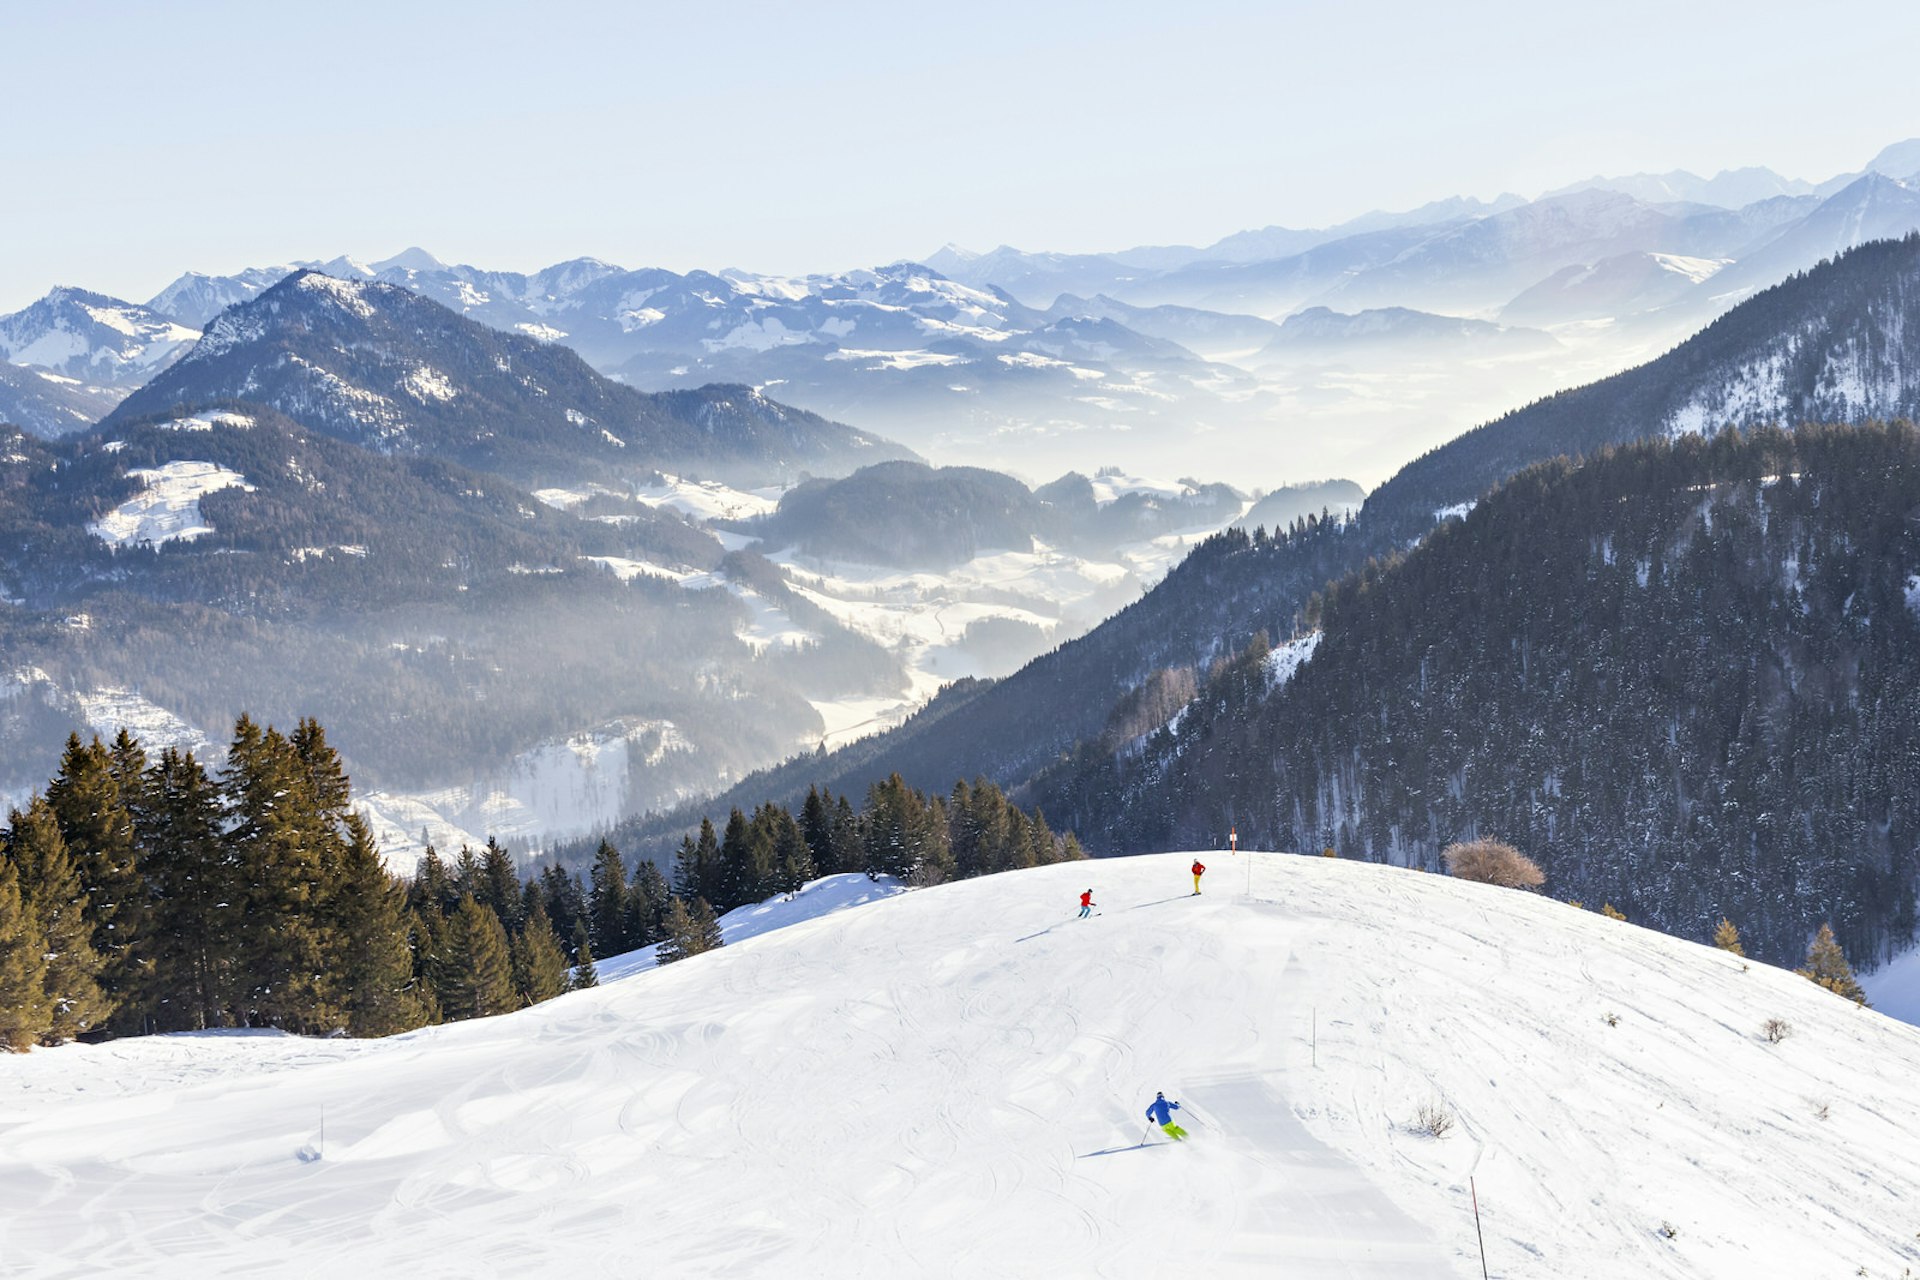 The top of a ski run at Sudelfeld–Bayrischzell ski resort, looking down over the snow-covered mountain range 